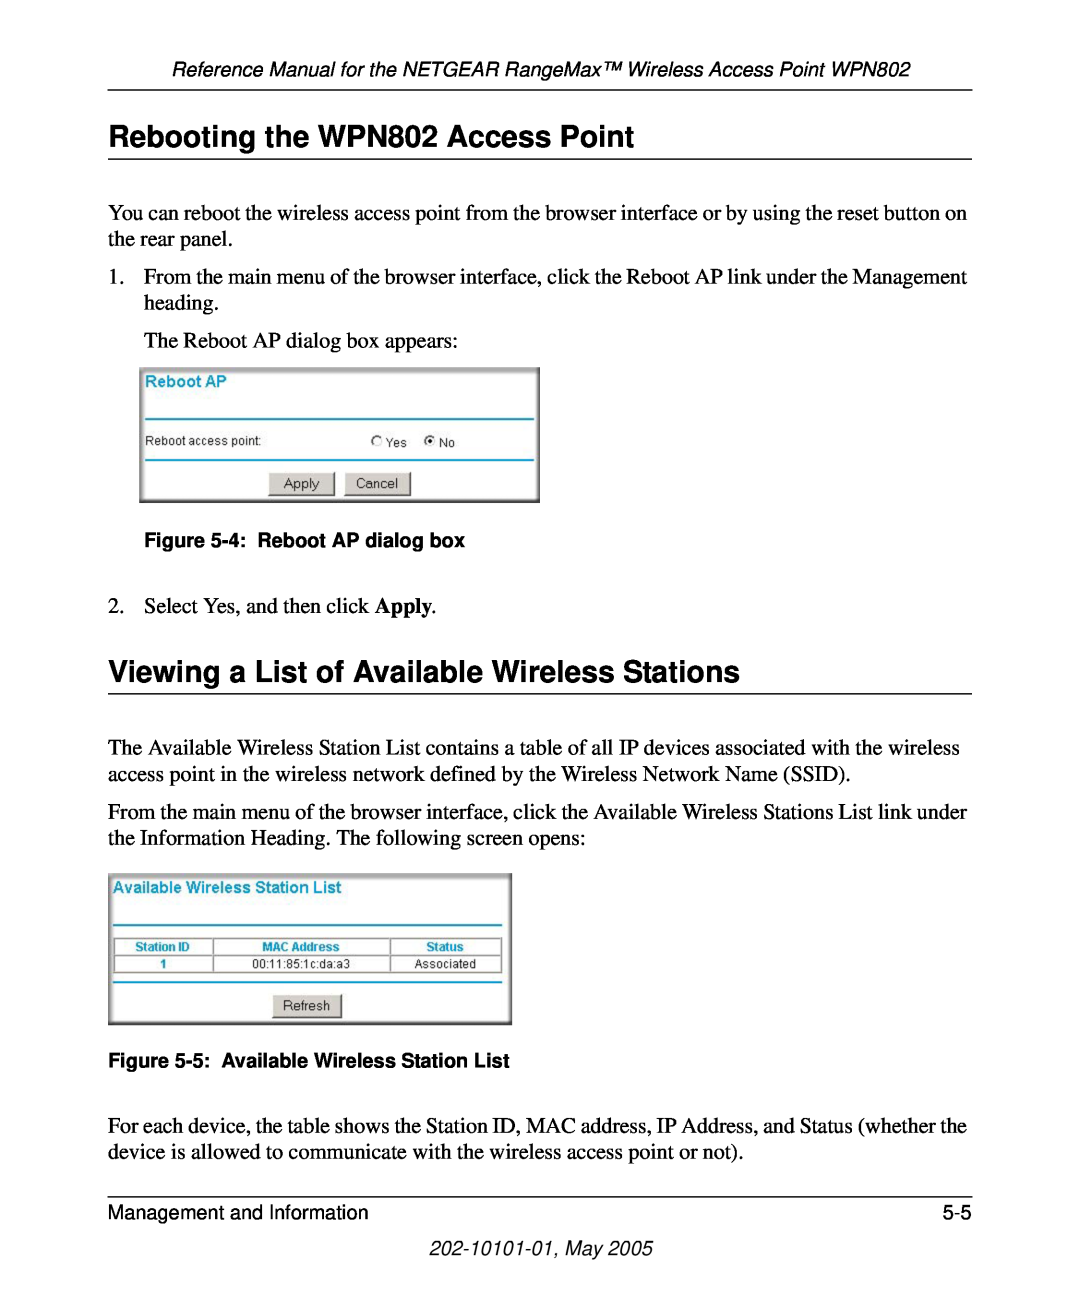 NETGEAR manual Rebooting the WPN802 Access Point, Viewing a List of Available Wireless Stations 